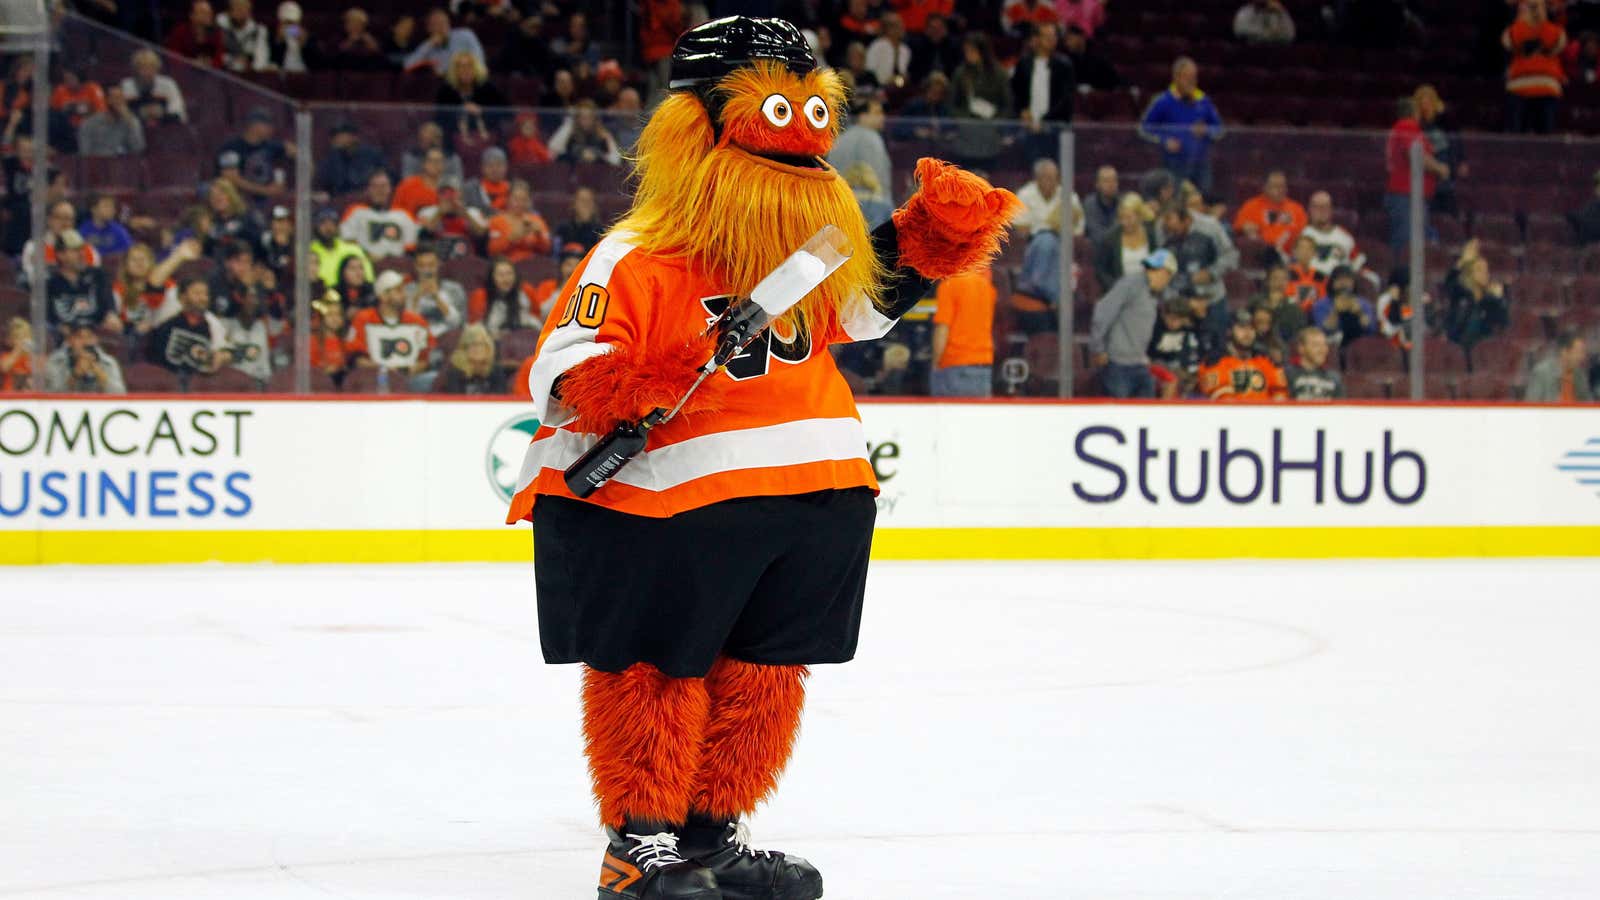 Gritty is loyal, Gritty is agile. But is Gritty Antifa?